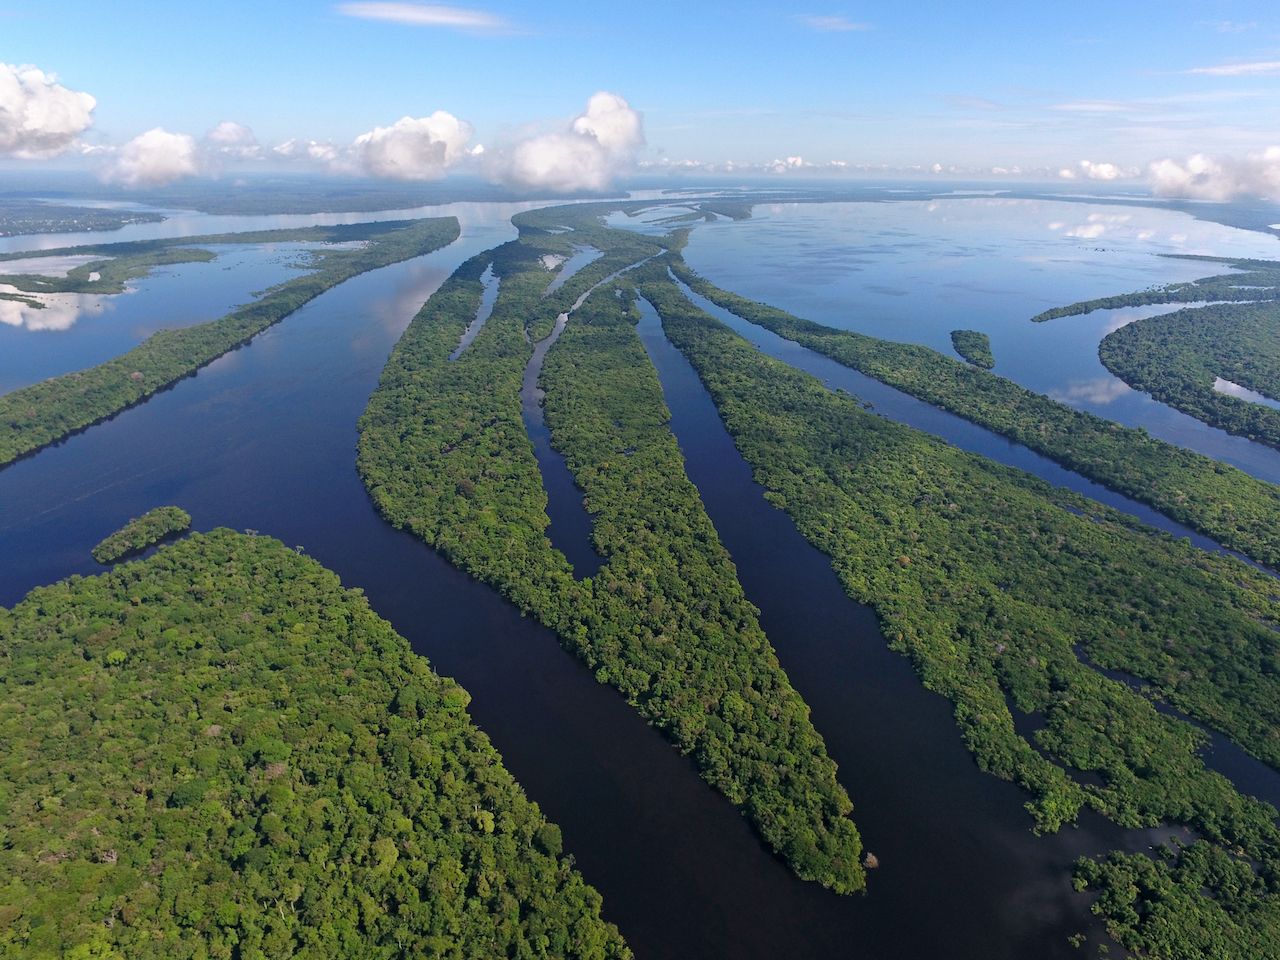 Anavilhanas Archipelago, amazonia forest flooded in Negro River,